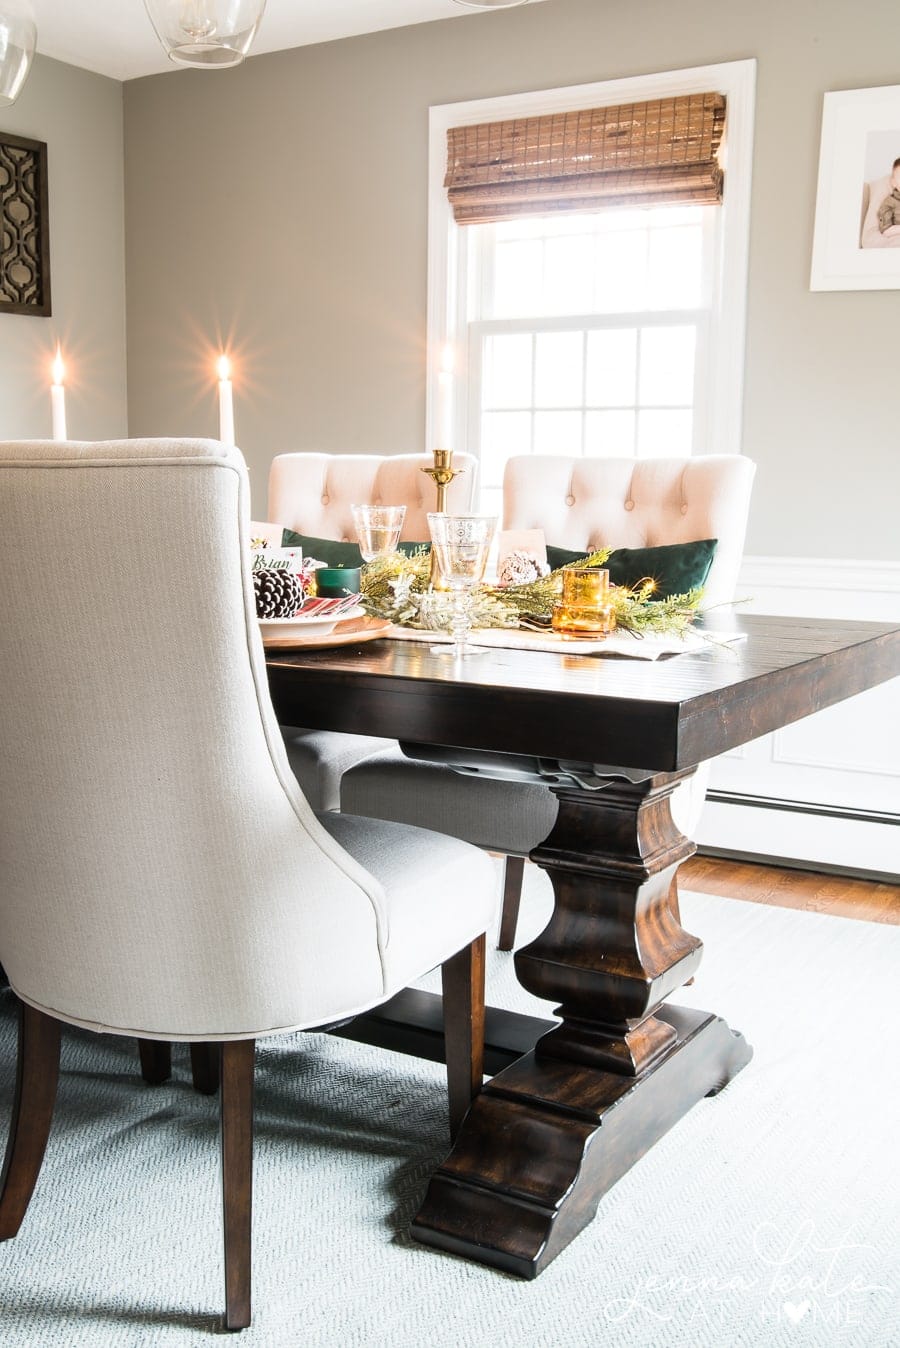 A dark-brown, wooden dining table with tall, upholstered chairs and gold/green place settings